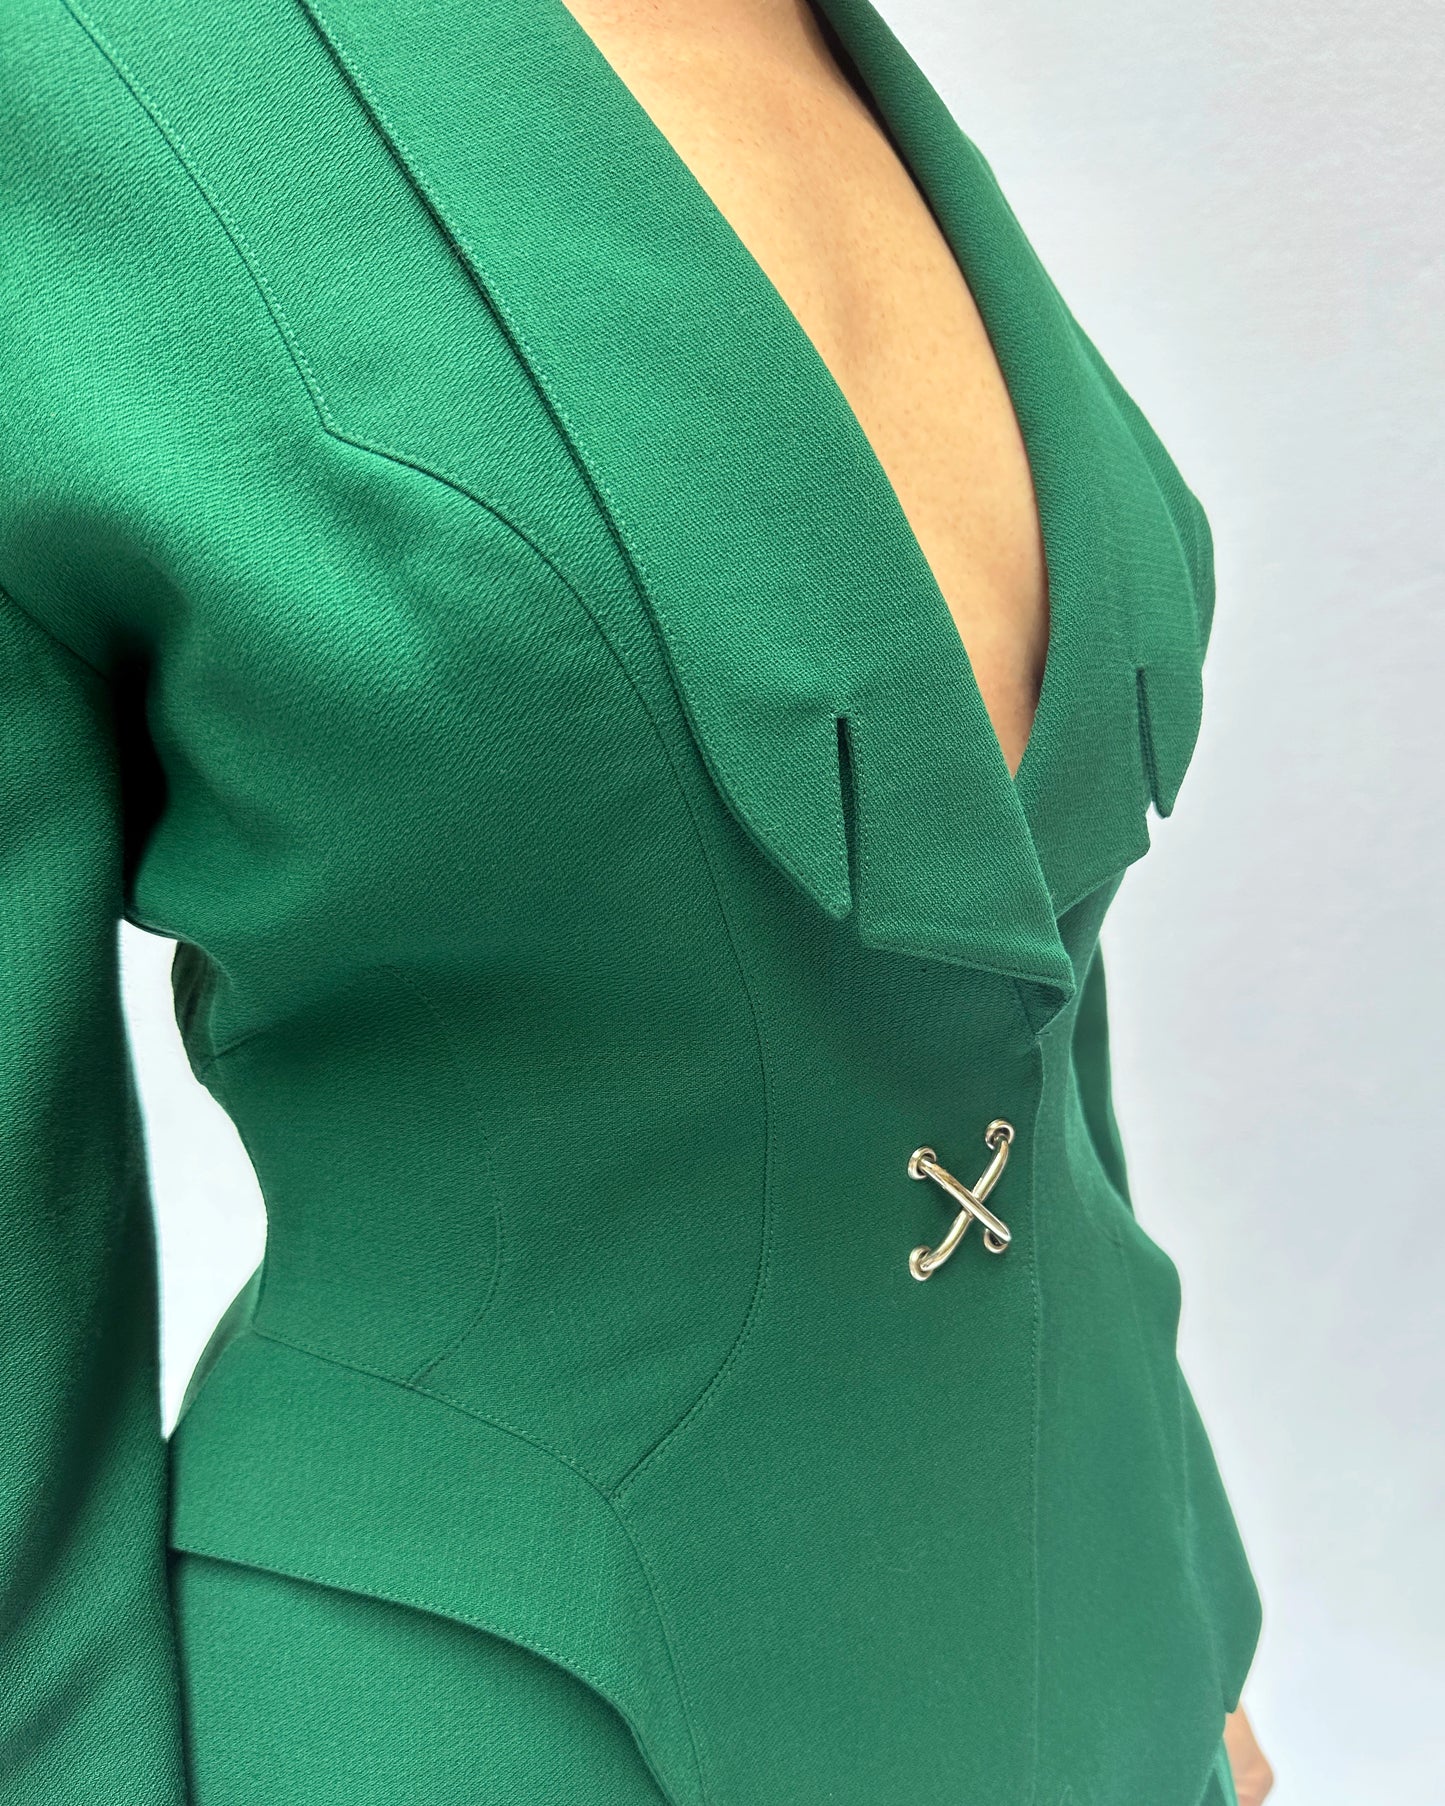 VINTAGE THIERRY MUGLER FALL 1992 EMERALD JACKET + PLEATED SKIRT SUIT